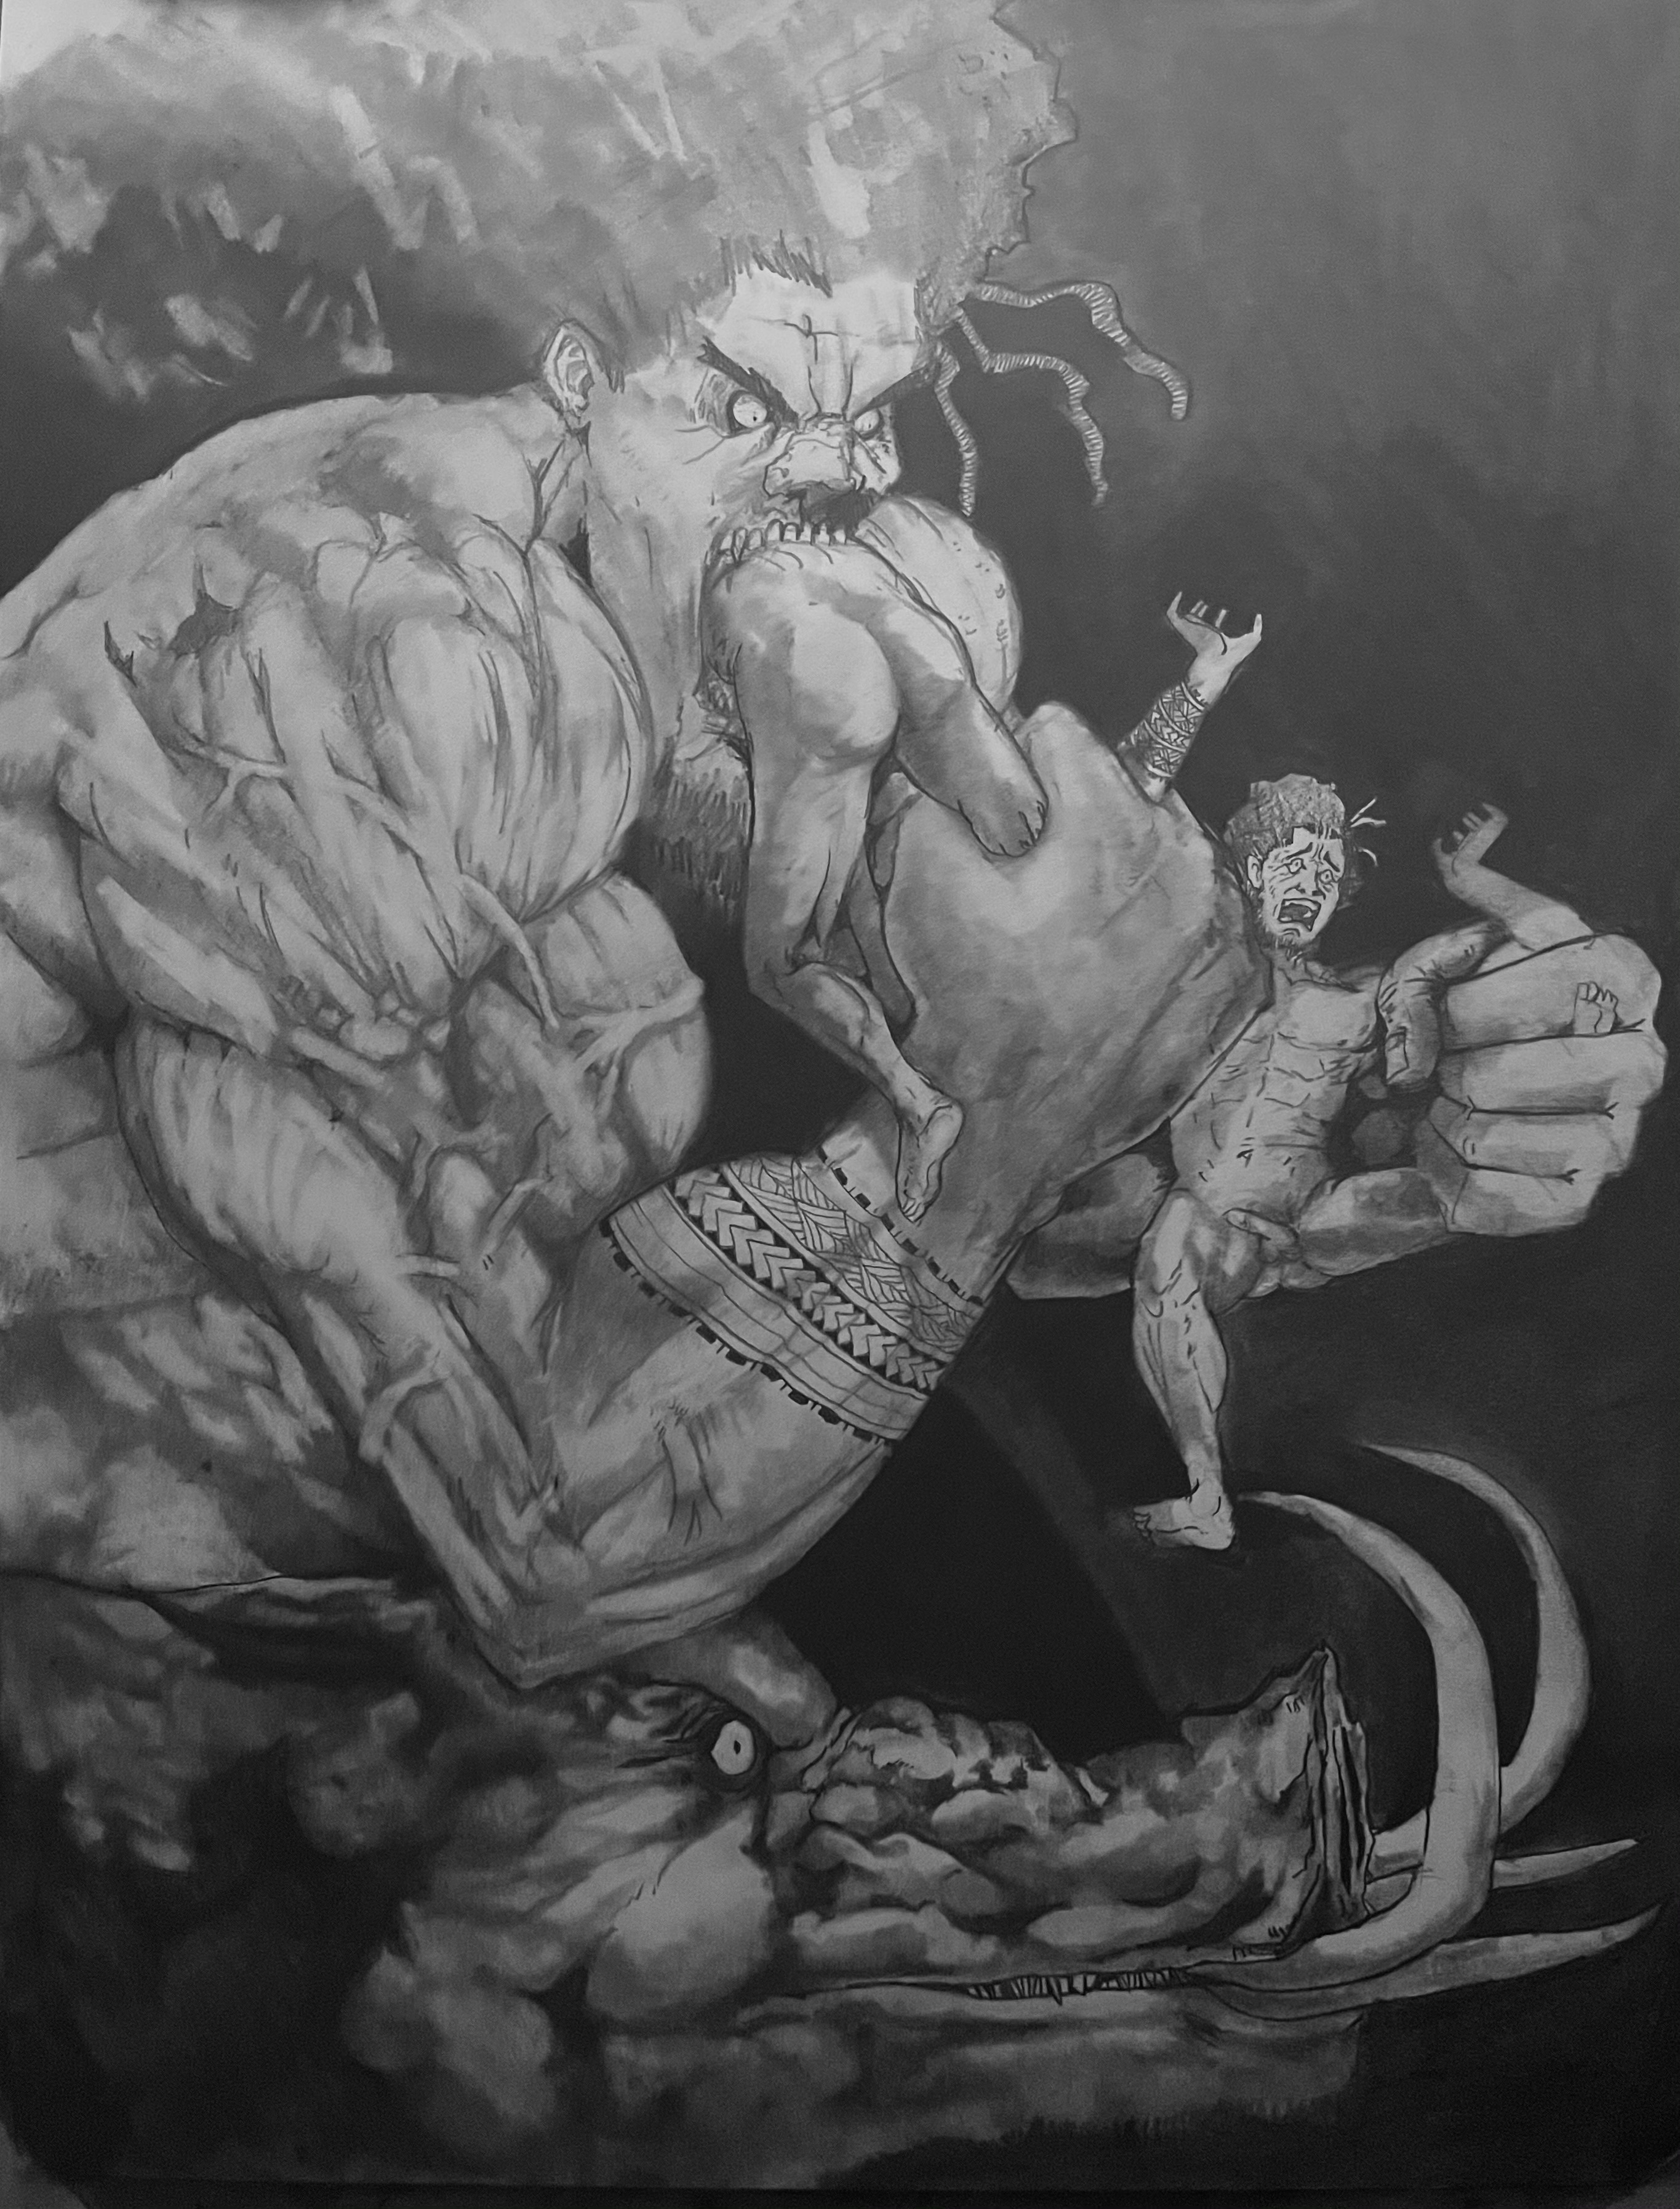 Gluttony graphite drawing.